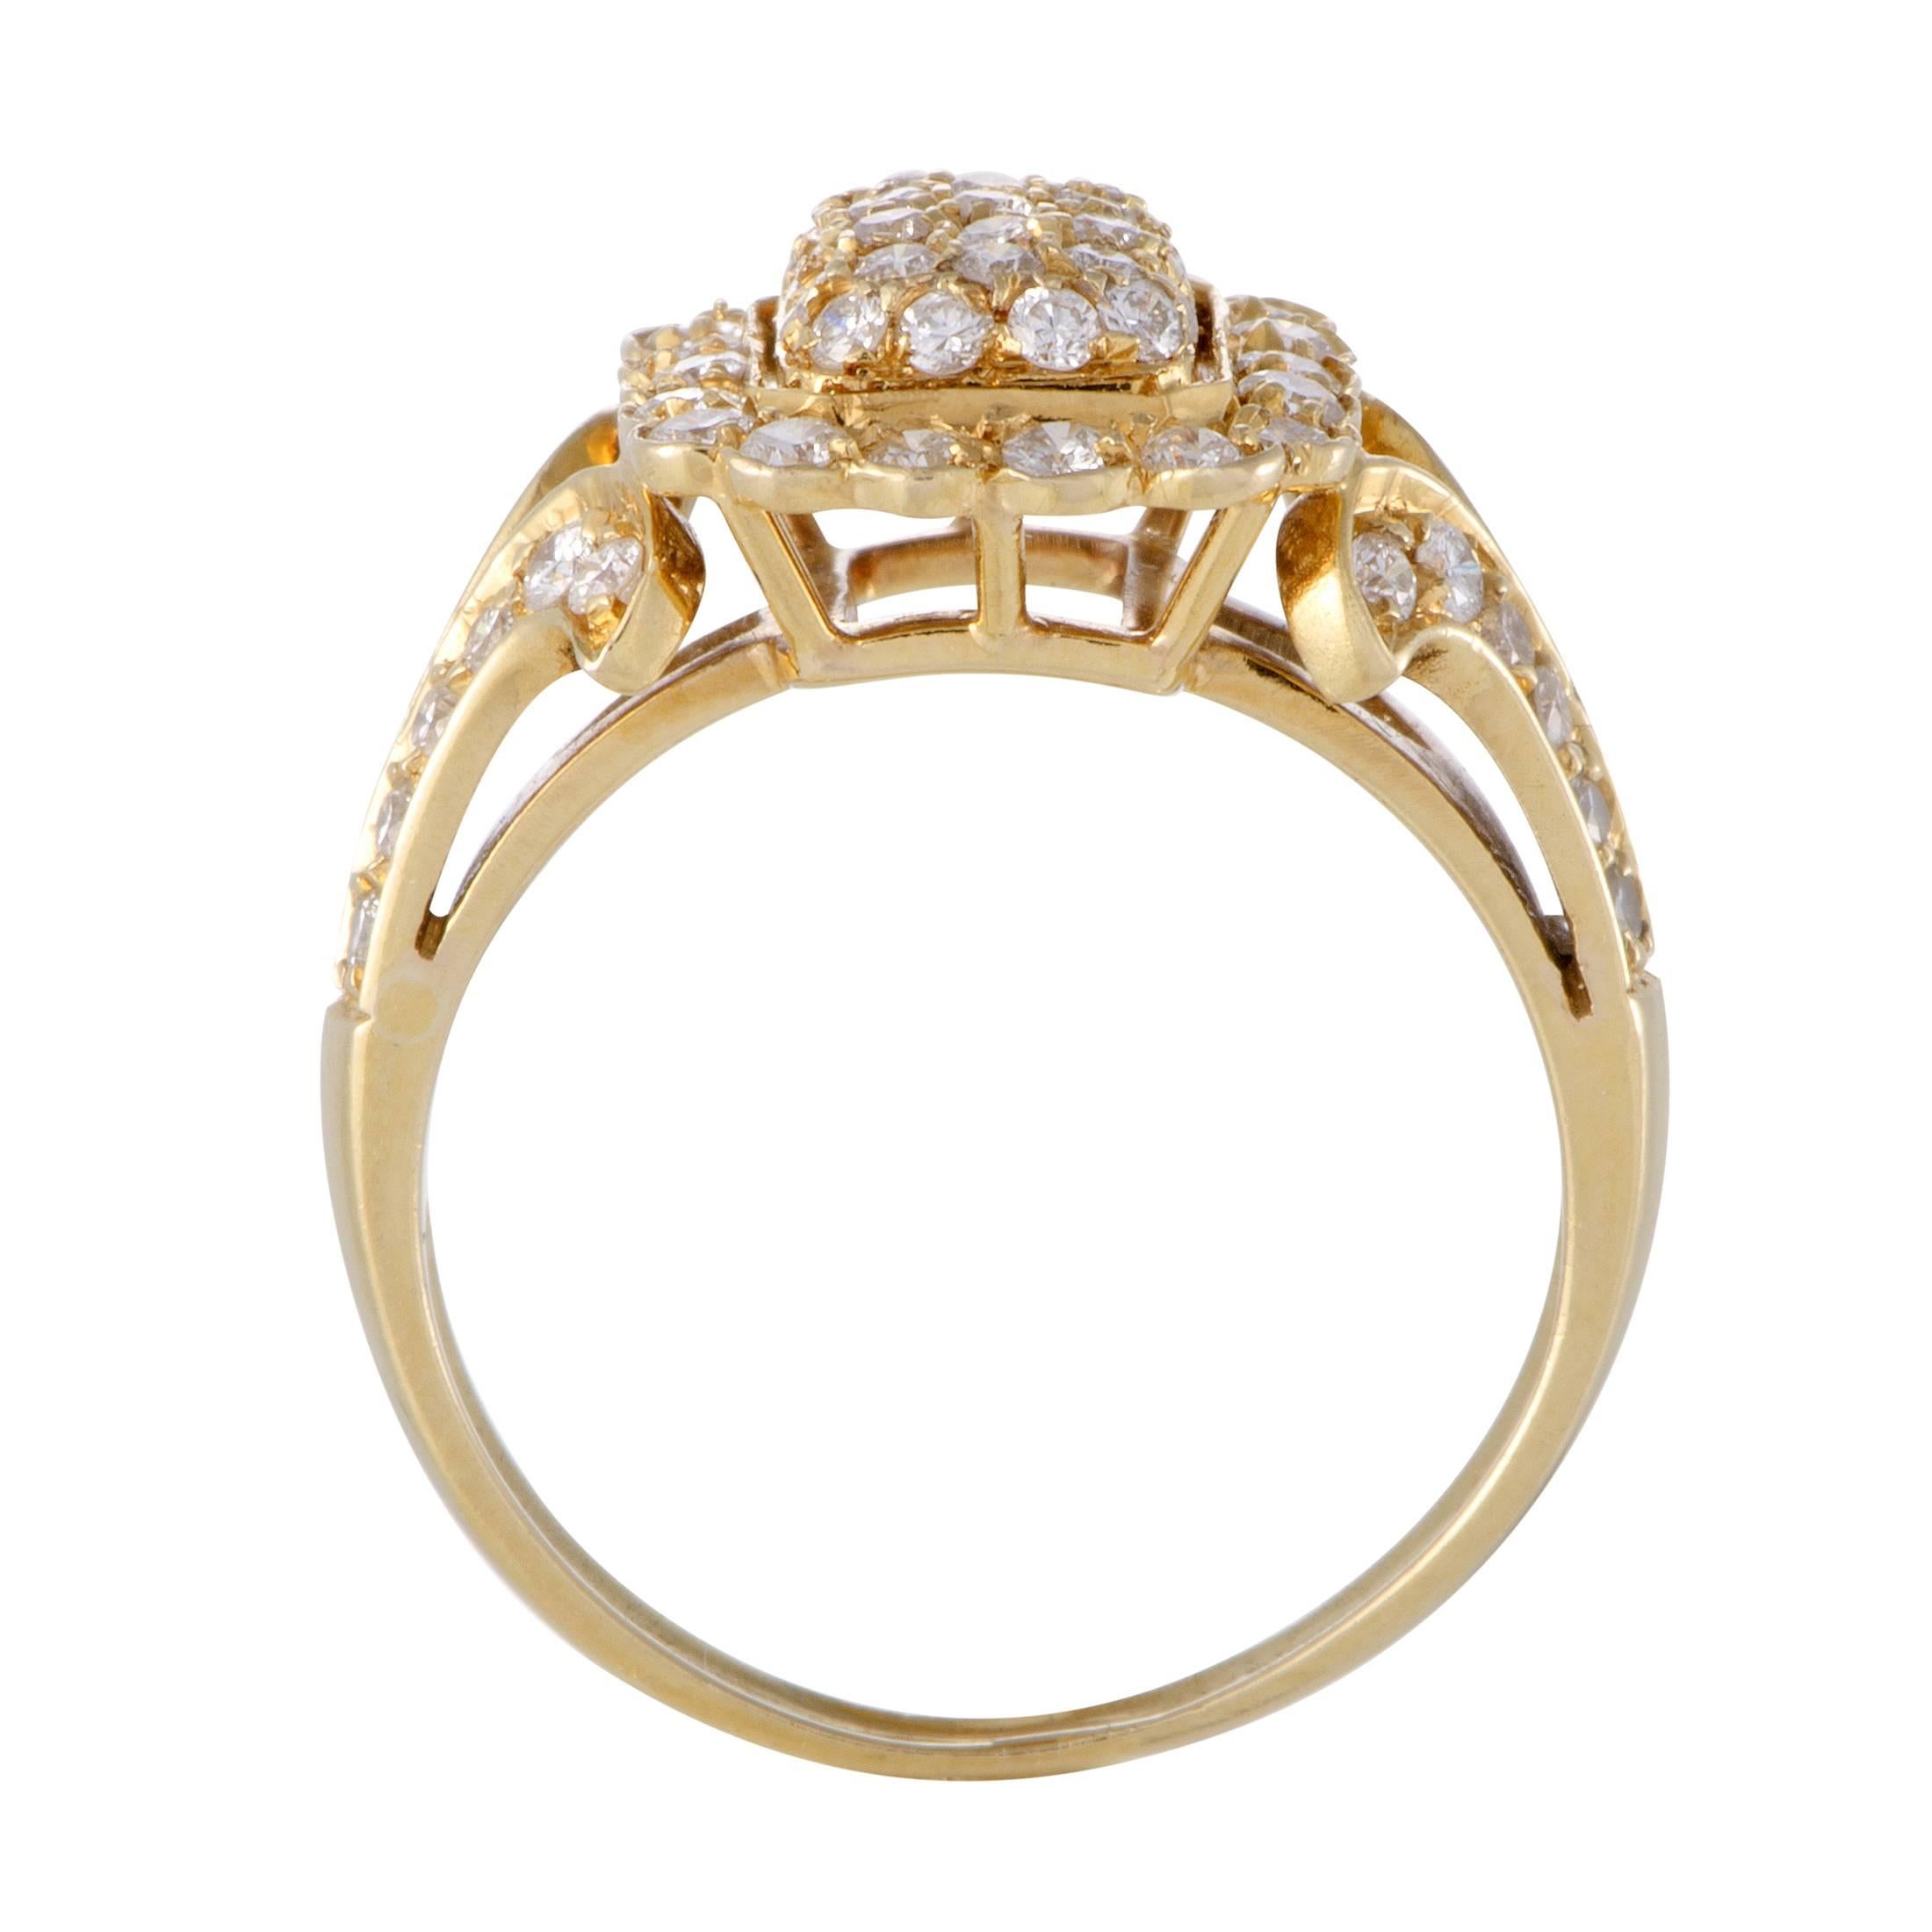 A sight of classic luxury and traditional aesthetics produced by a charming blend of radiant 18K yellow gold and sparkling diamonds amounting to 1.00 carat, this exceptional vintage ring from Cartier is an item of immense quality and fine